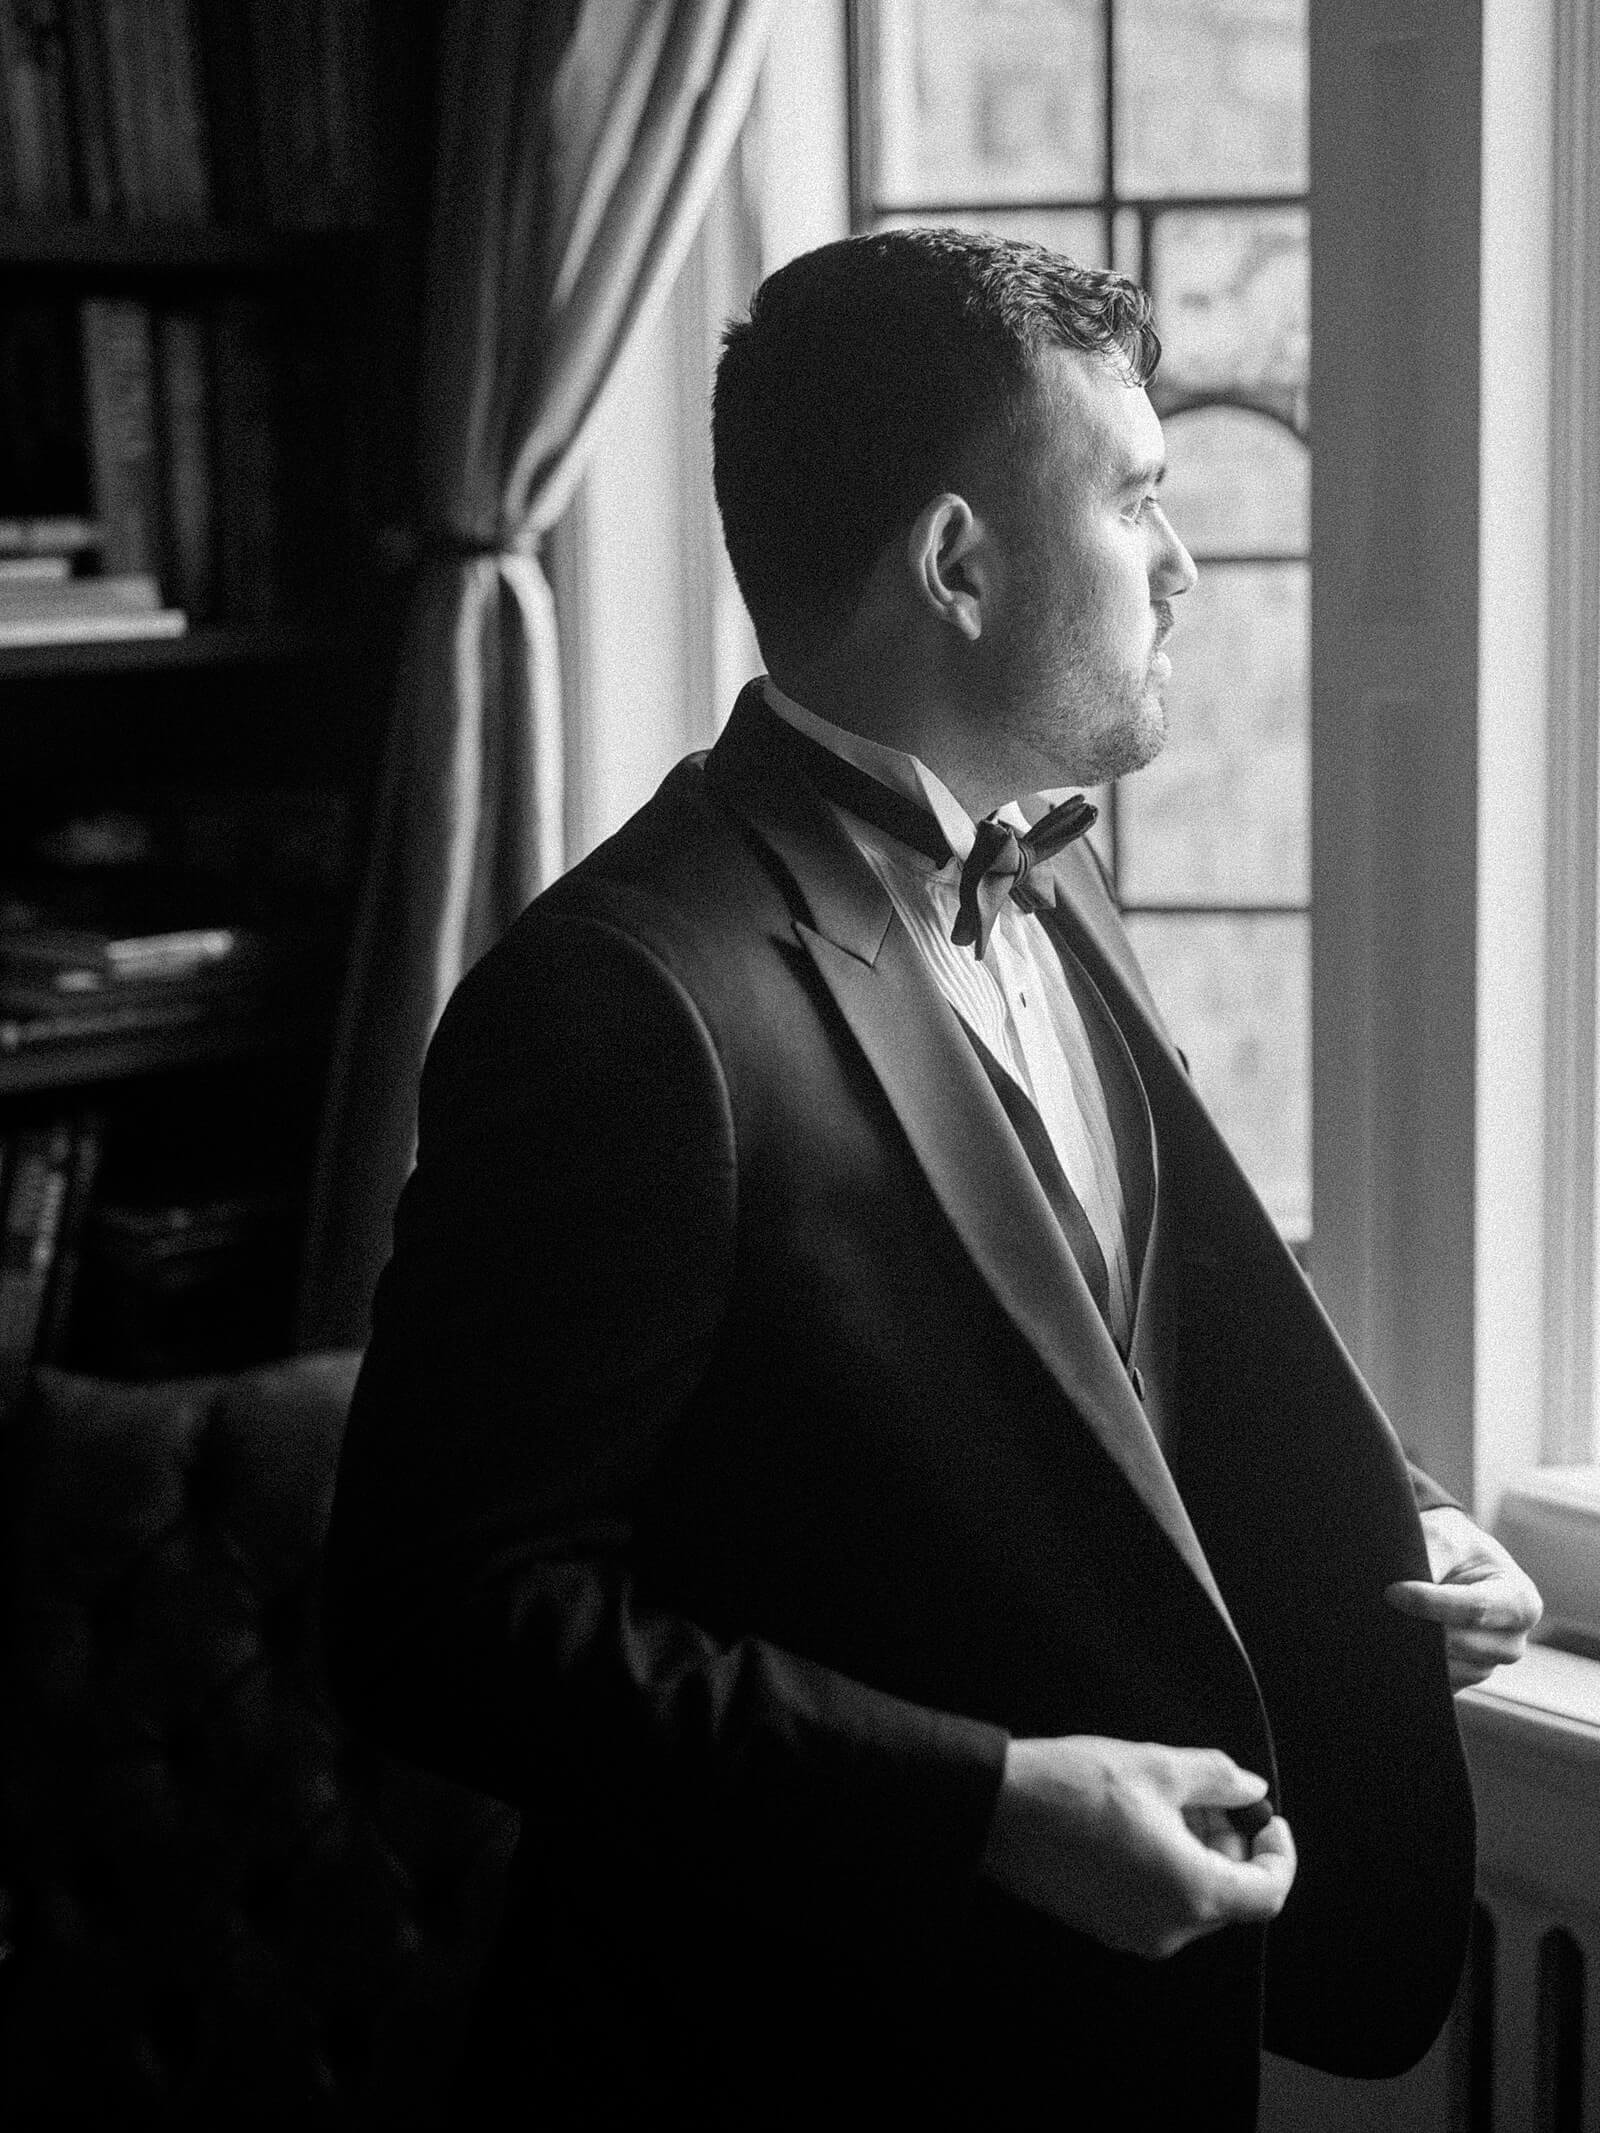 Groom getting ready at Thornewood Castle - Jacqueline Benét Photography